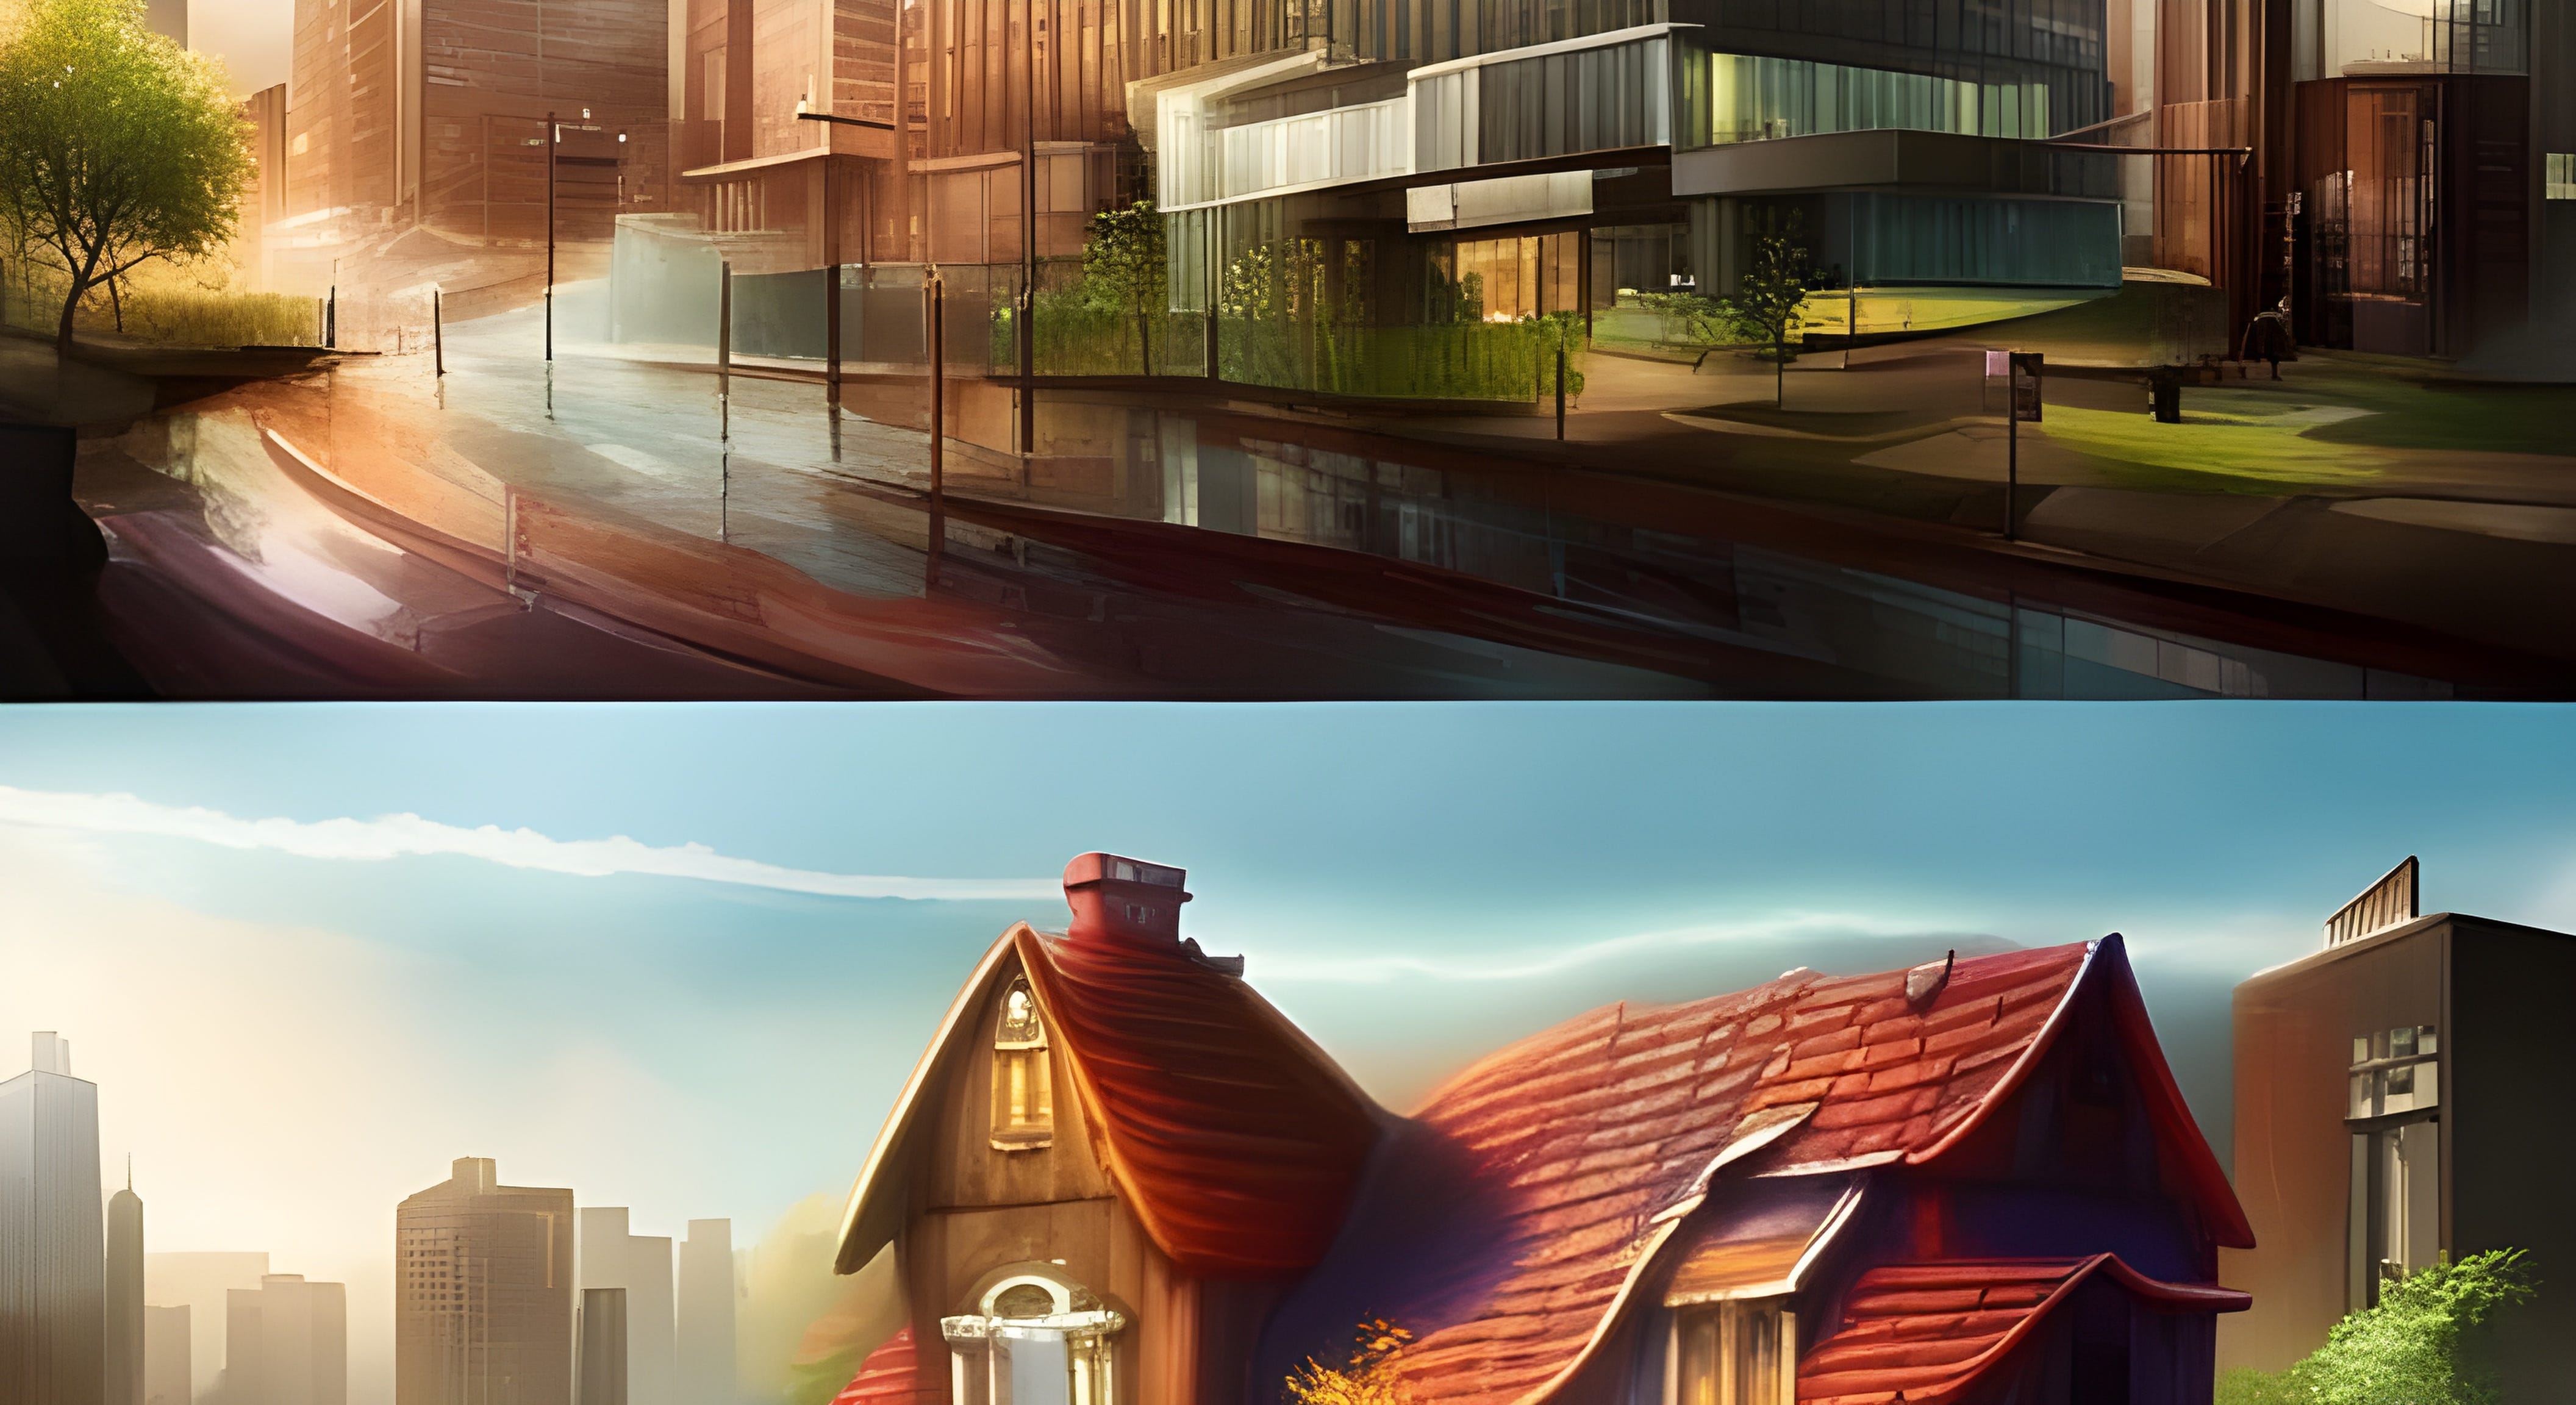 A split screen illustration with office buildings on top and a cottage on the bottom.